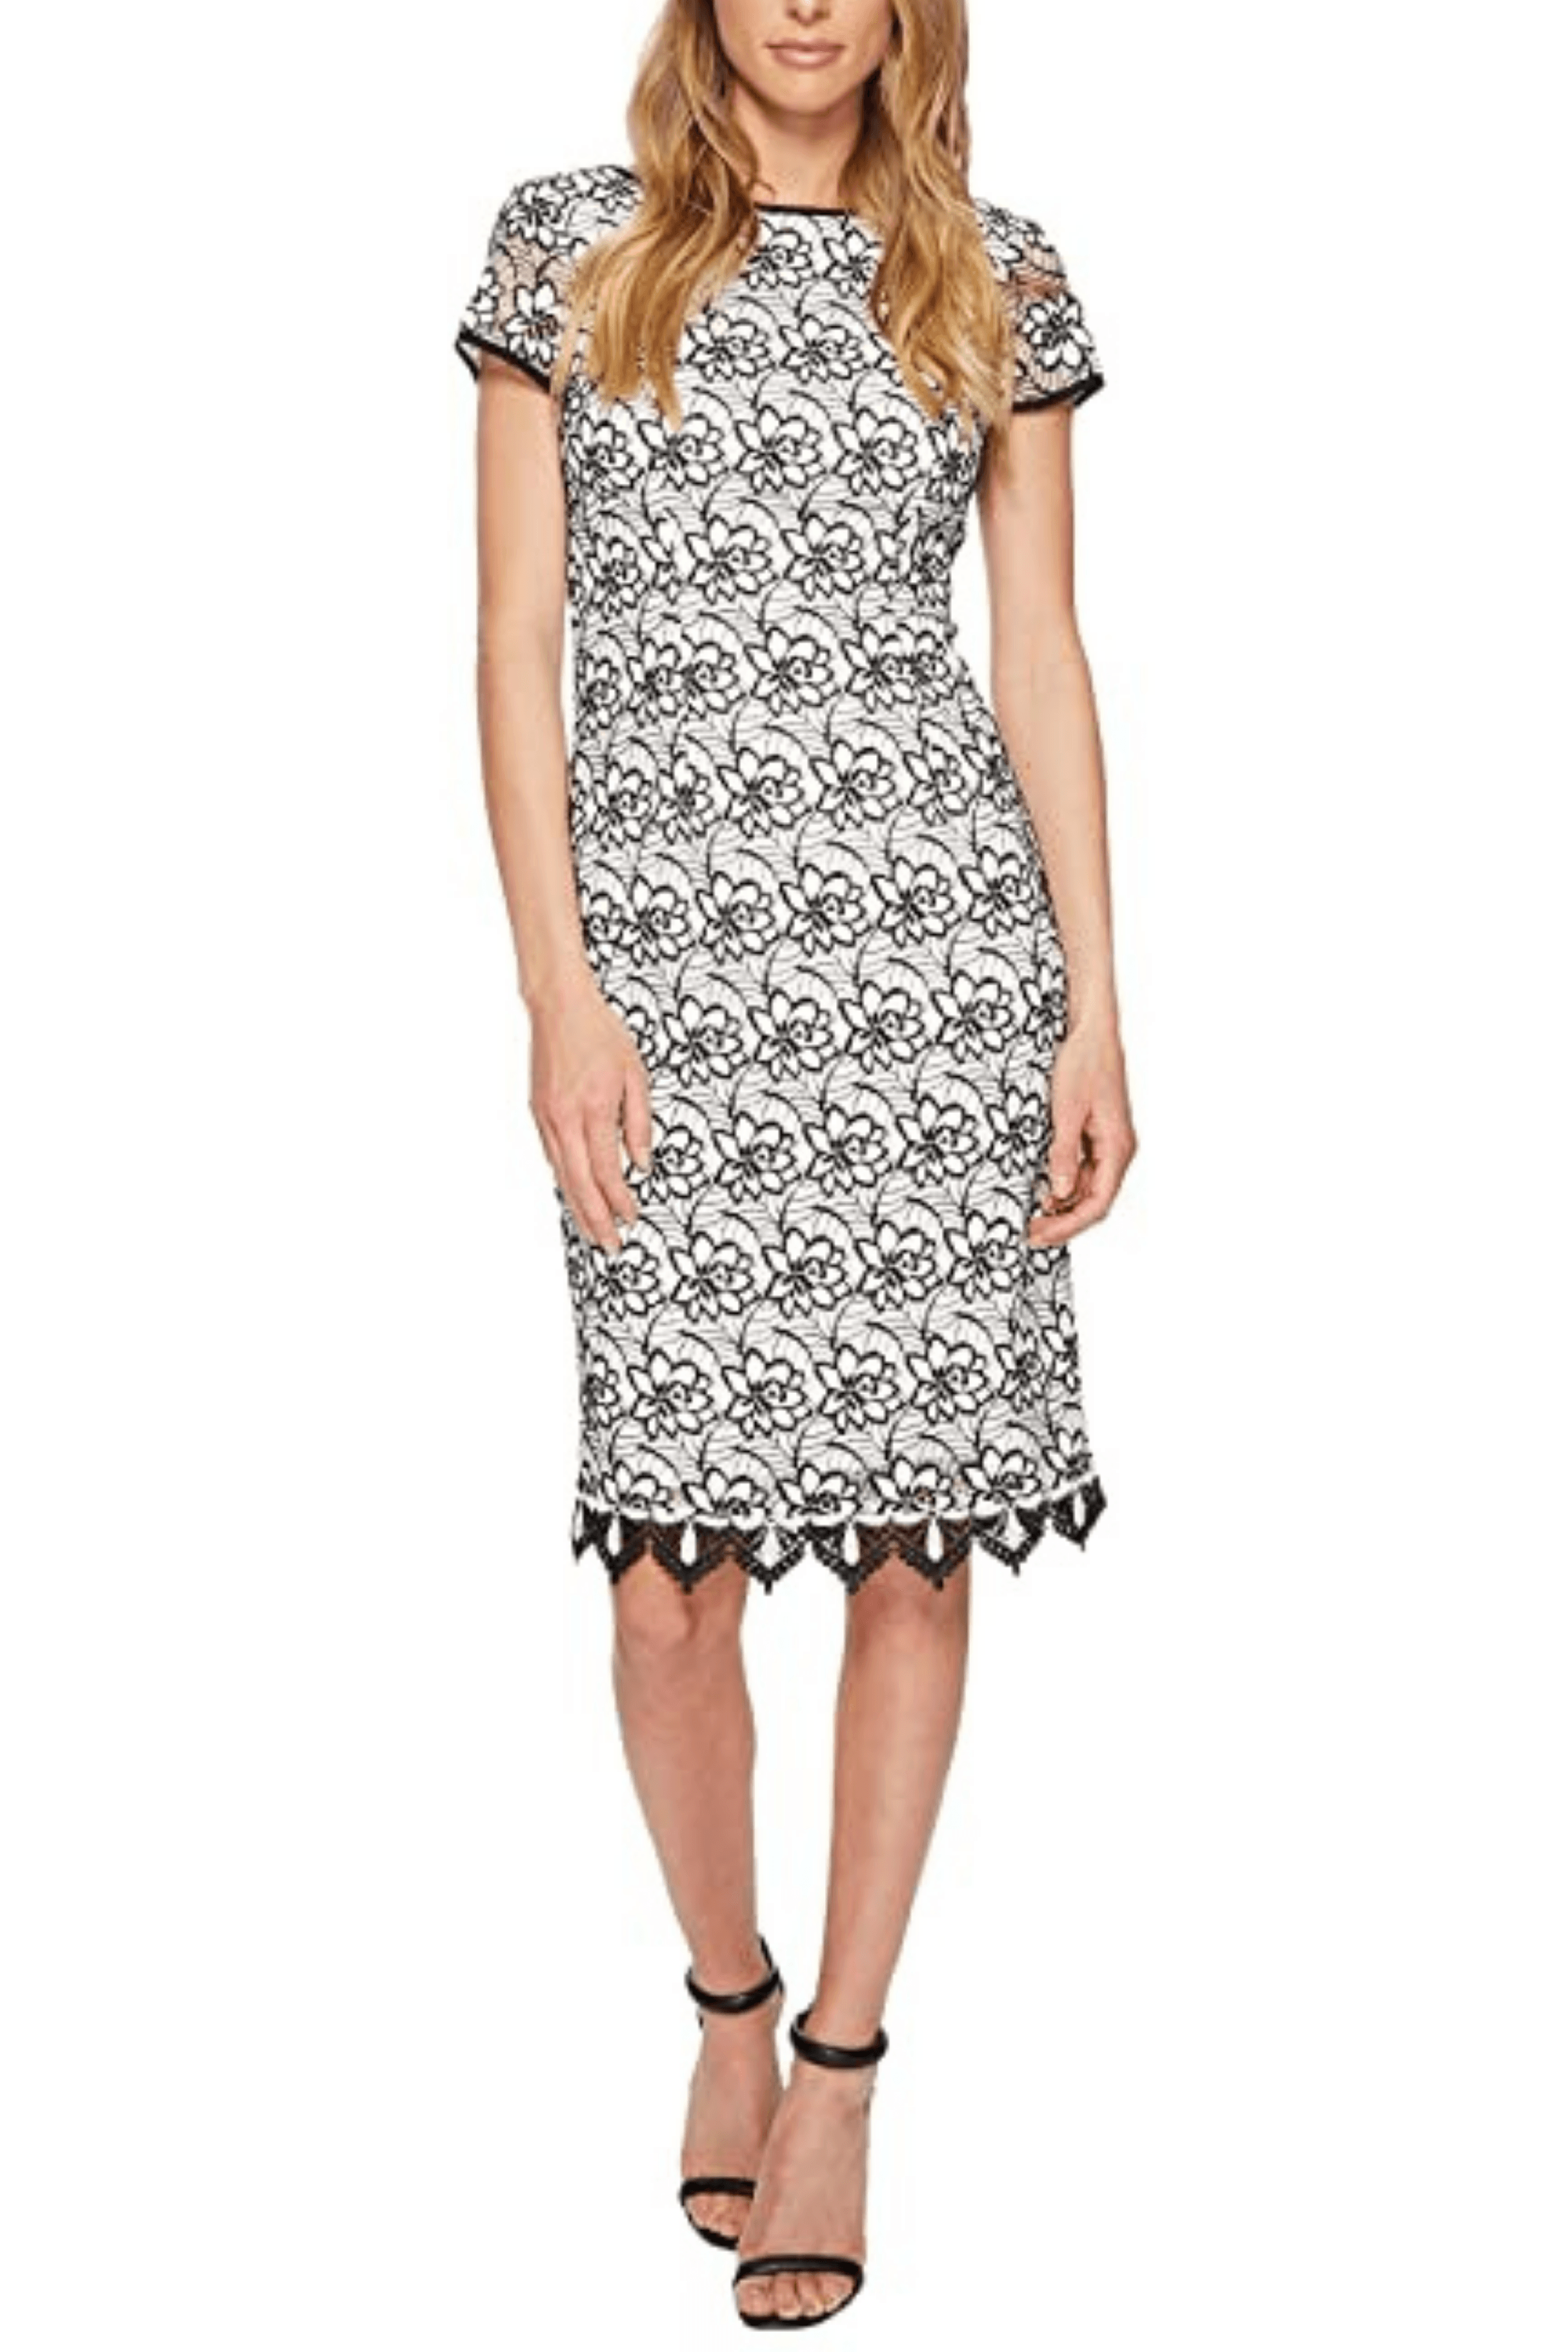 Adrianna Papell Short Cocktail Lace Dress AP1D101946 - The Dress Outlet